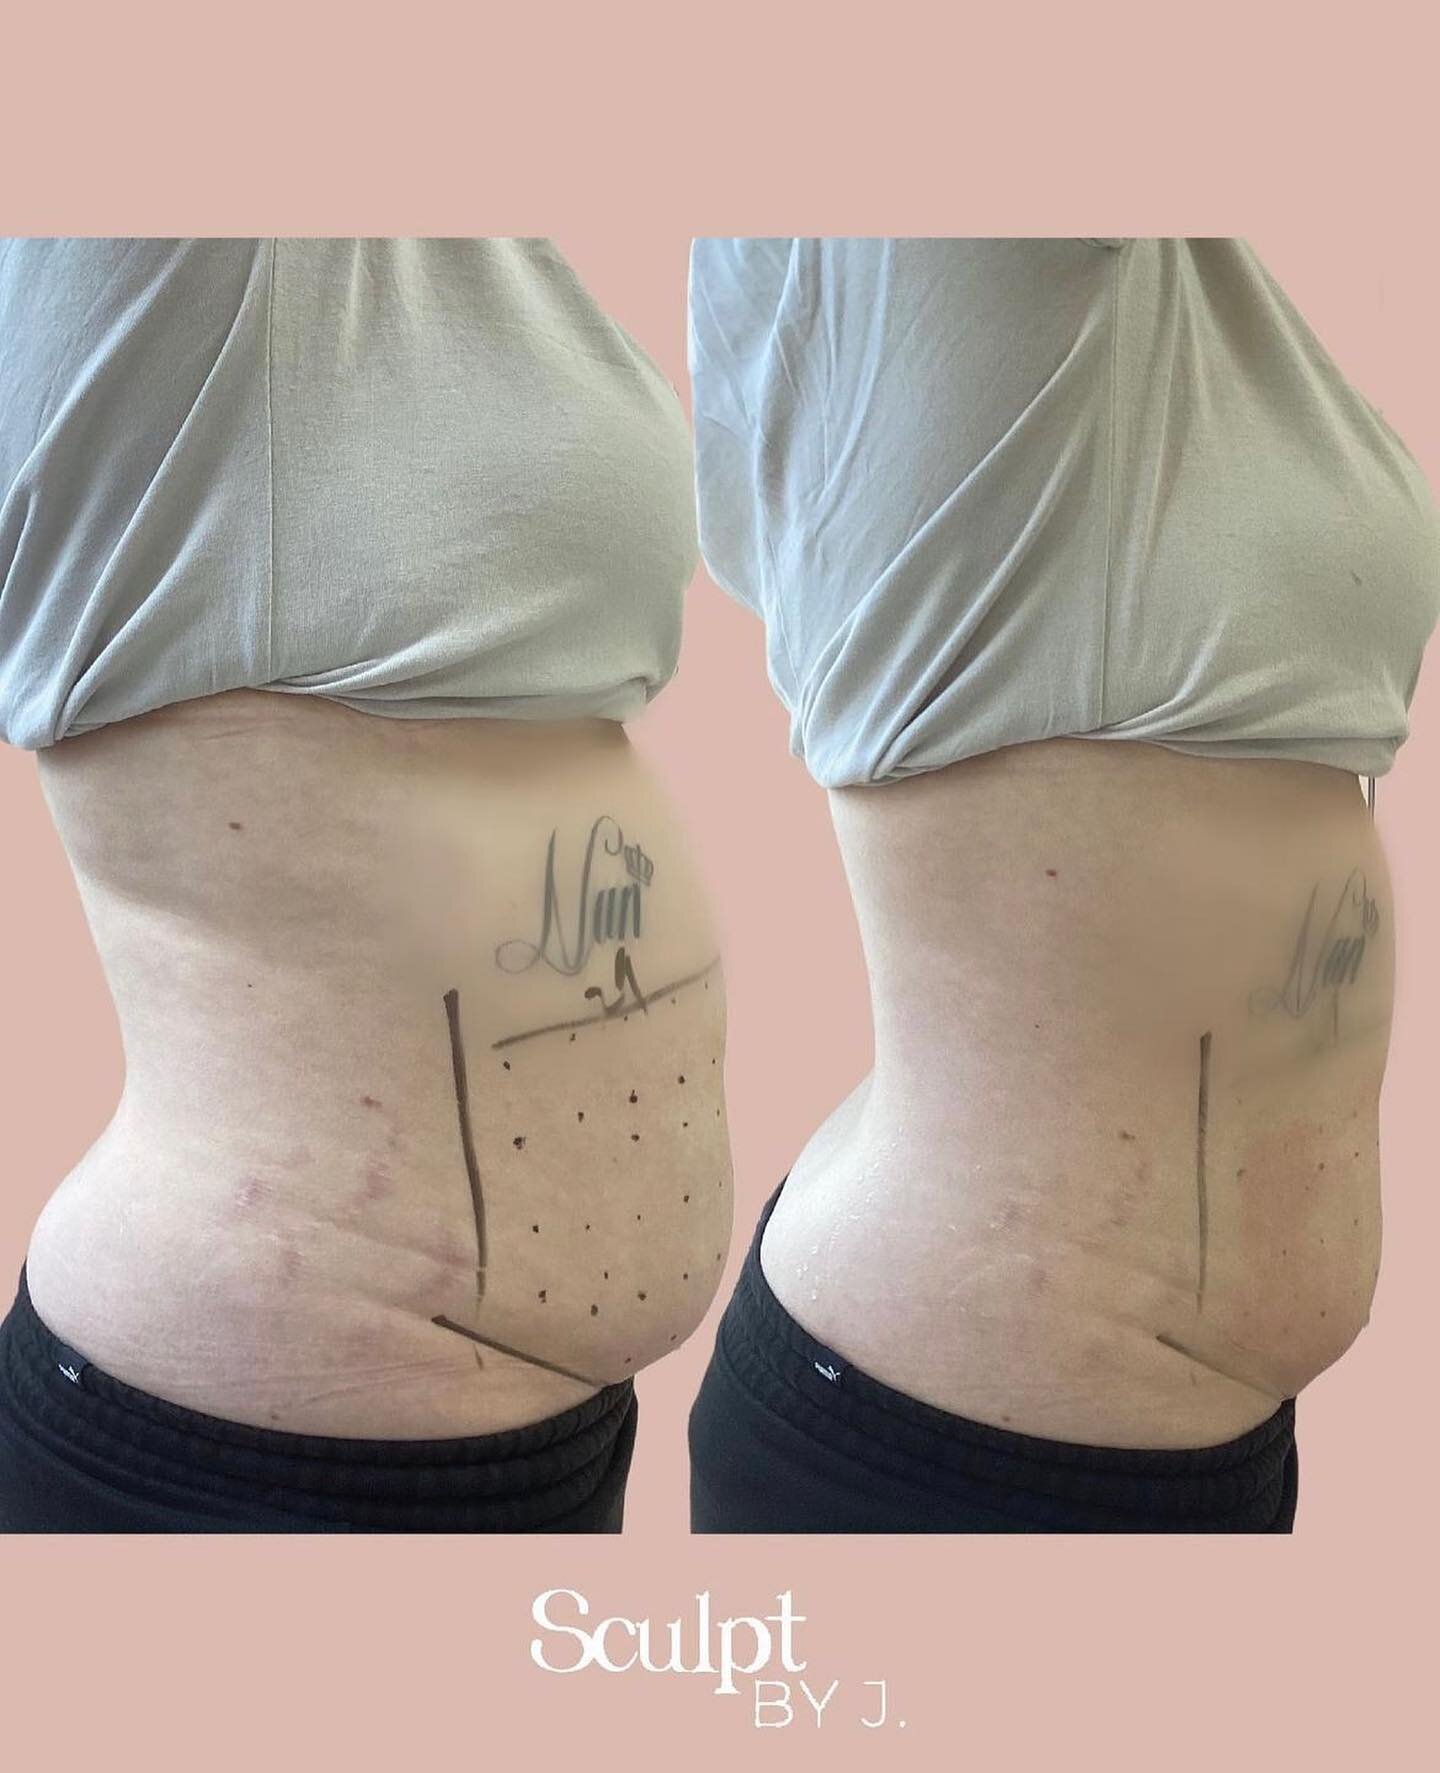 Can you believe this was only 1 session of LIPOCel.

LIPOcel is an innovative TGA approved non-invasive solution for reducing fat and reshaping the body. This clinically proven treatment specifically targets stubborn fat areas.

For best results we r